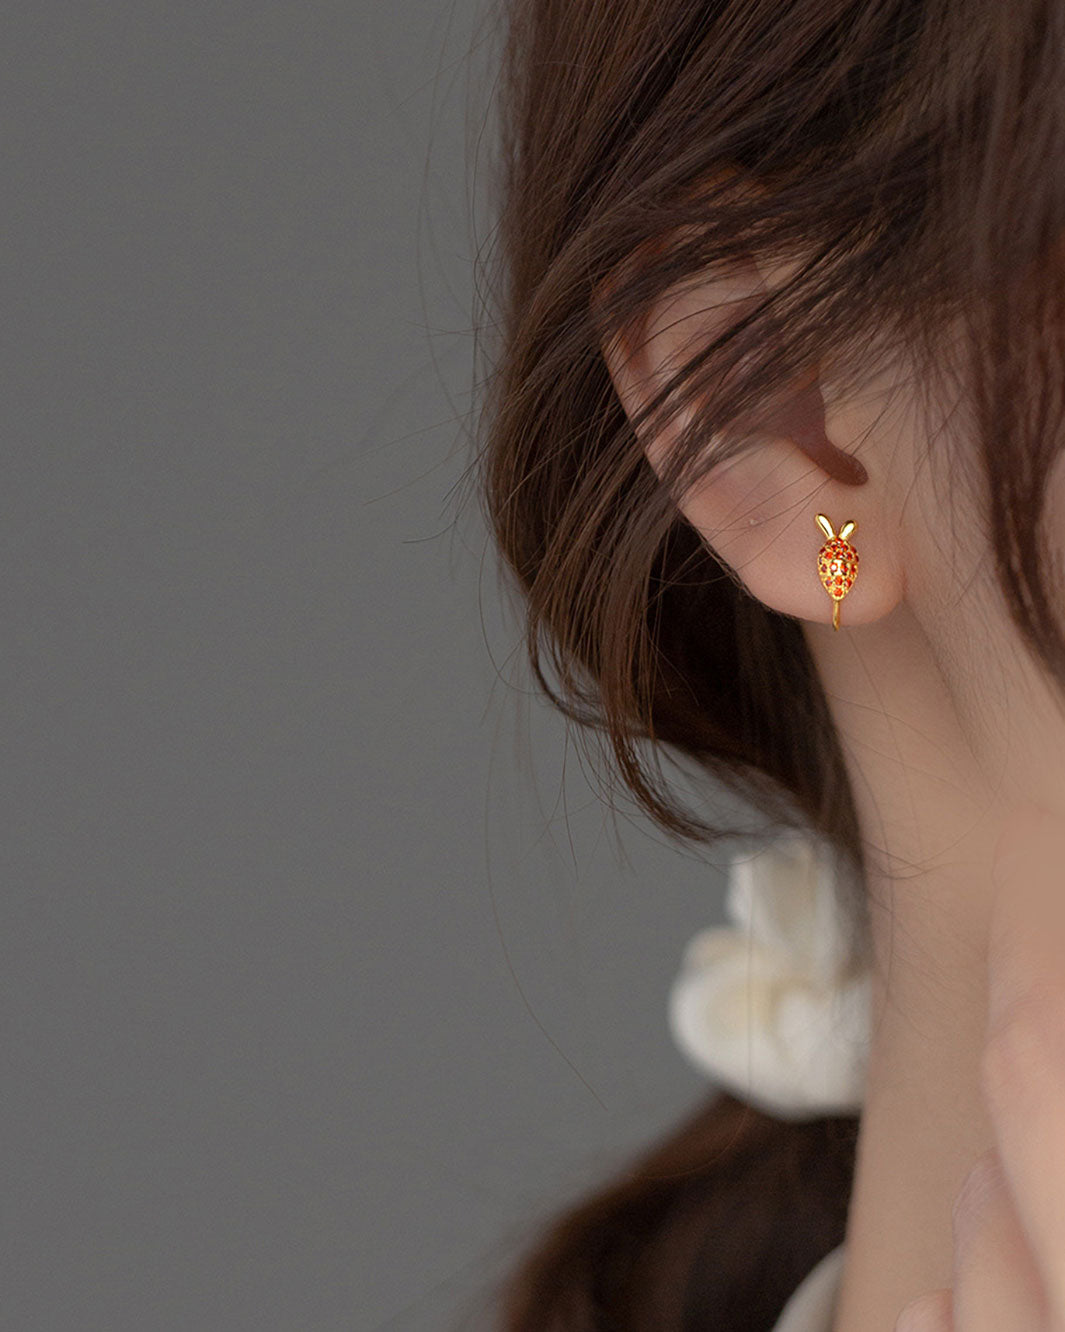 Bunny and Carrot Pave Ear Cuffs